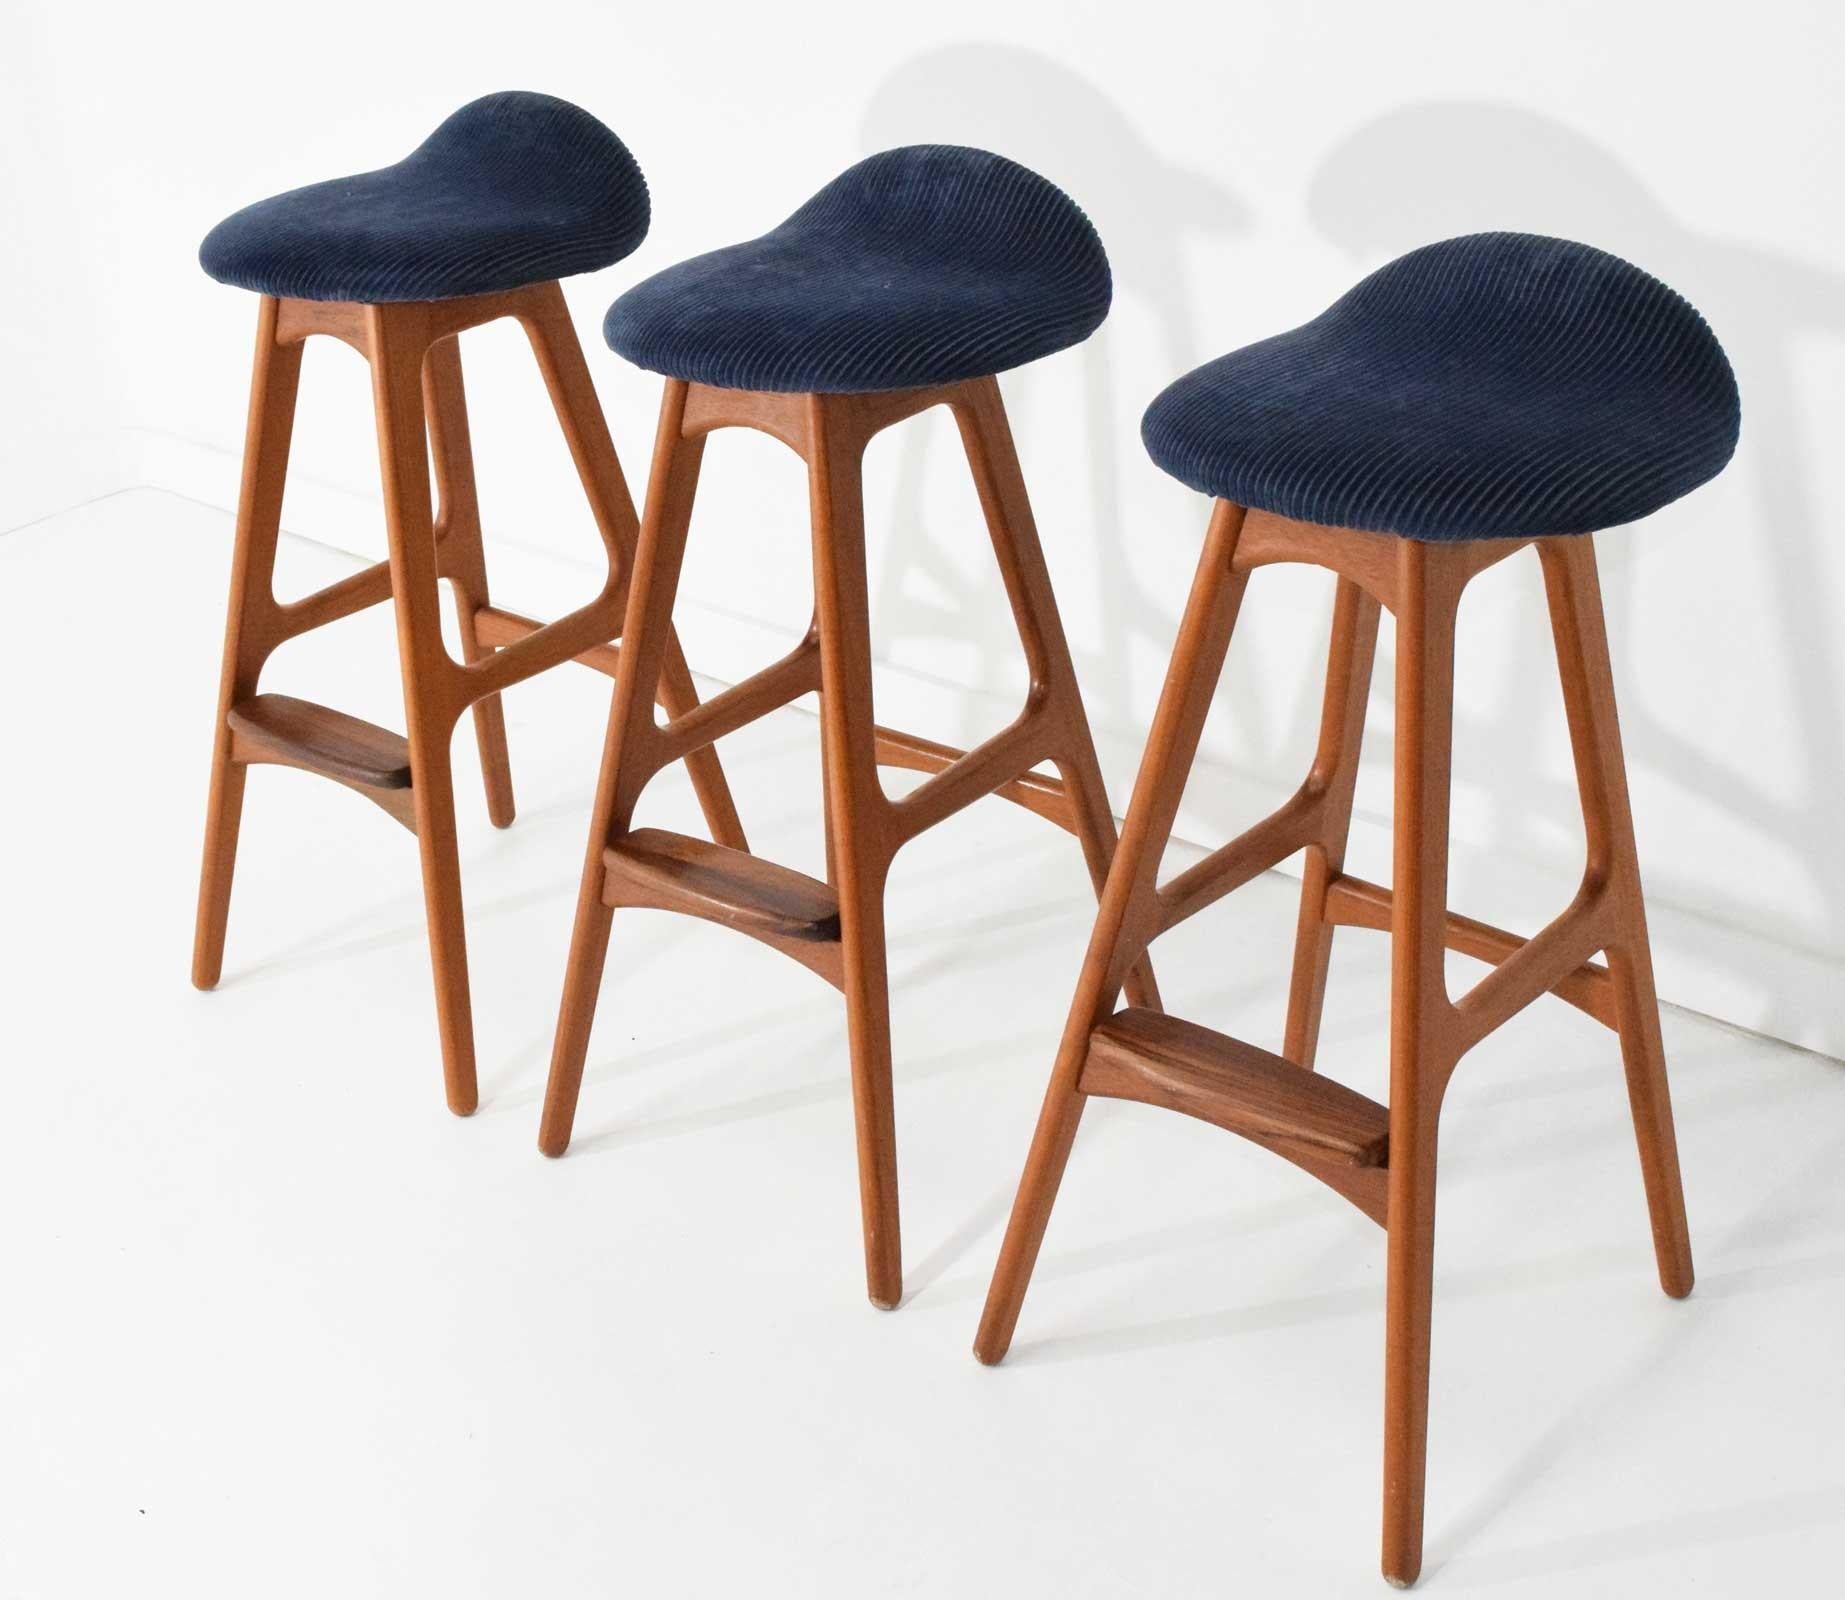 Iconic design by Erik Buch. Great looking bar stools in teak with blue corduroy seat cushions. Very easy to replace in fabric or leather of choose.